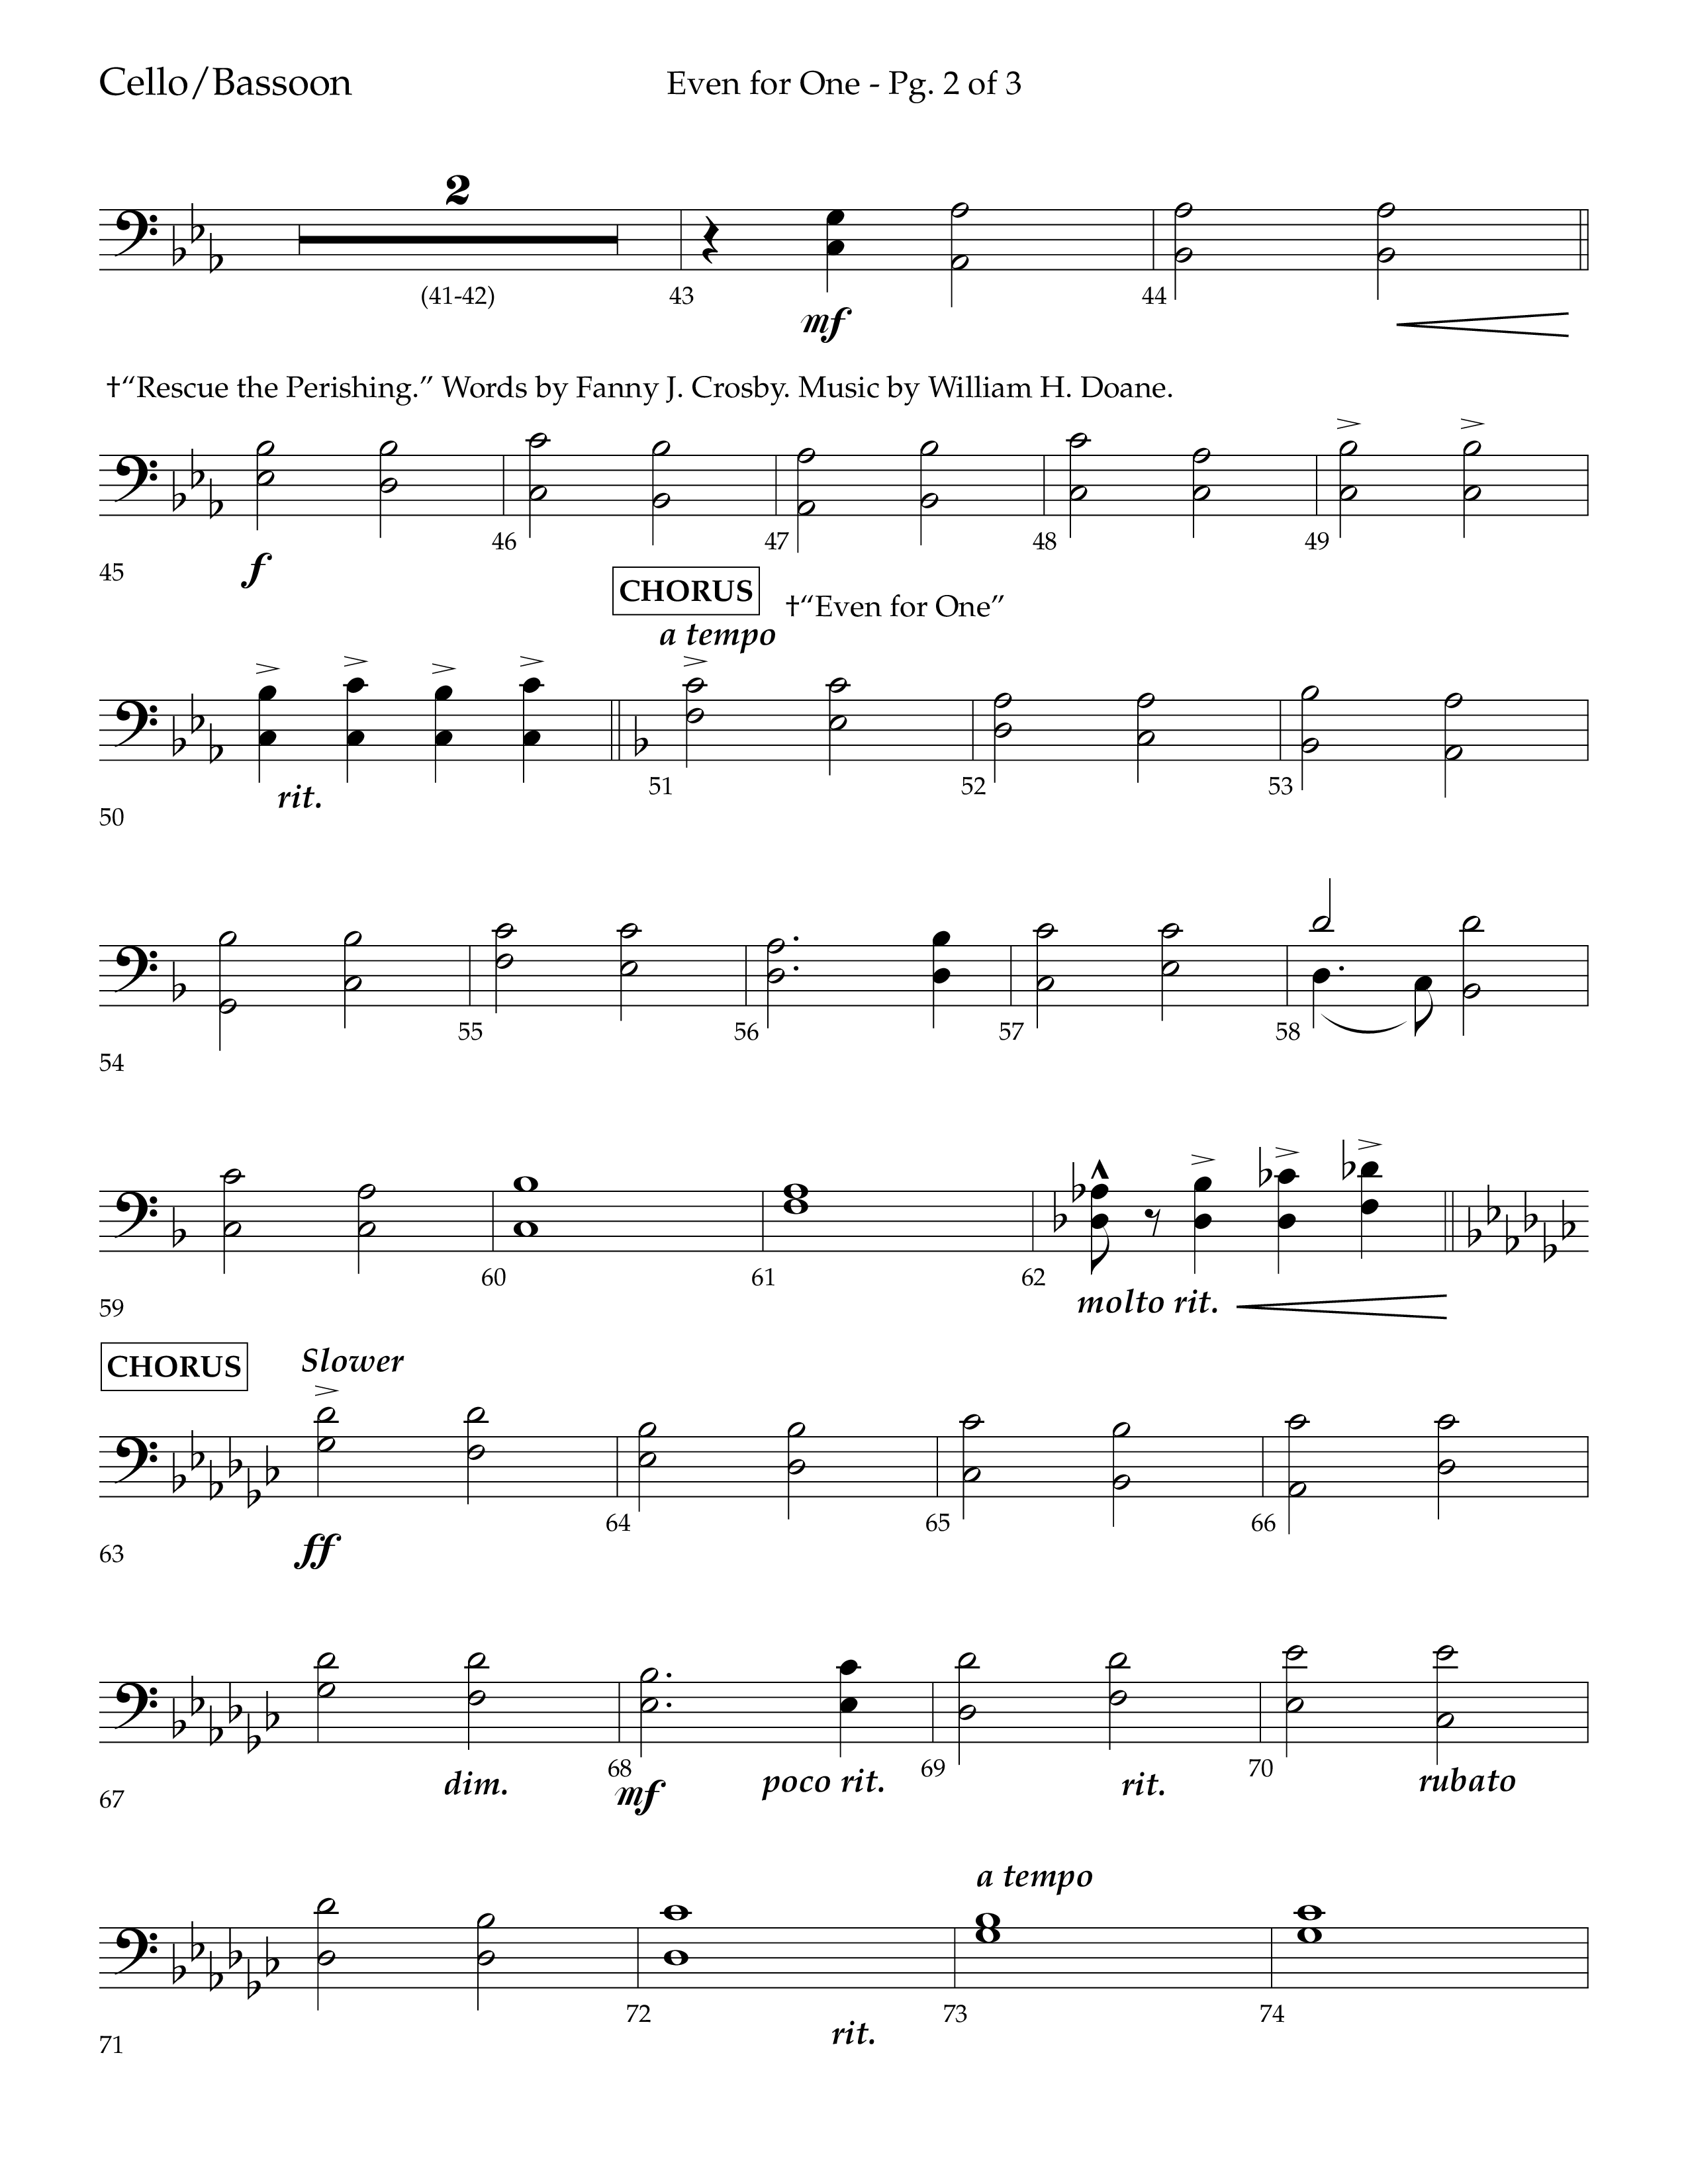 Even For One (Choral Anthem SATB) Cello (Lifeway Choral / Arr. Marty Hamby)